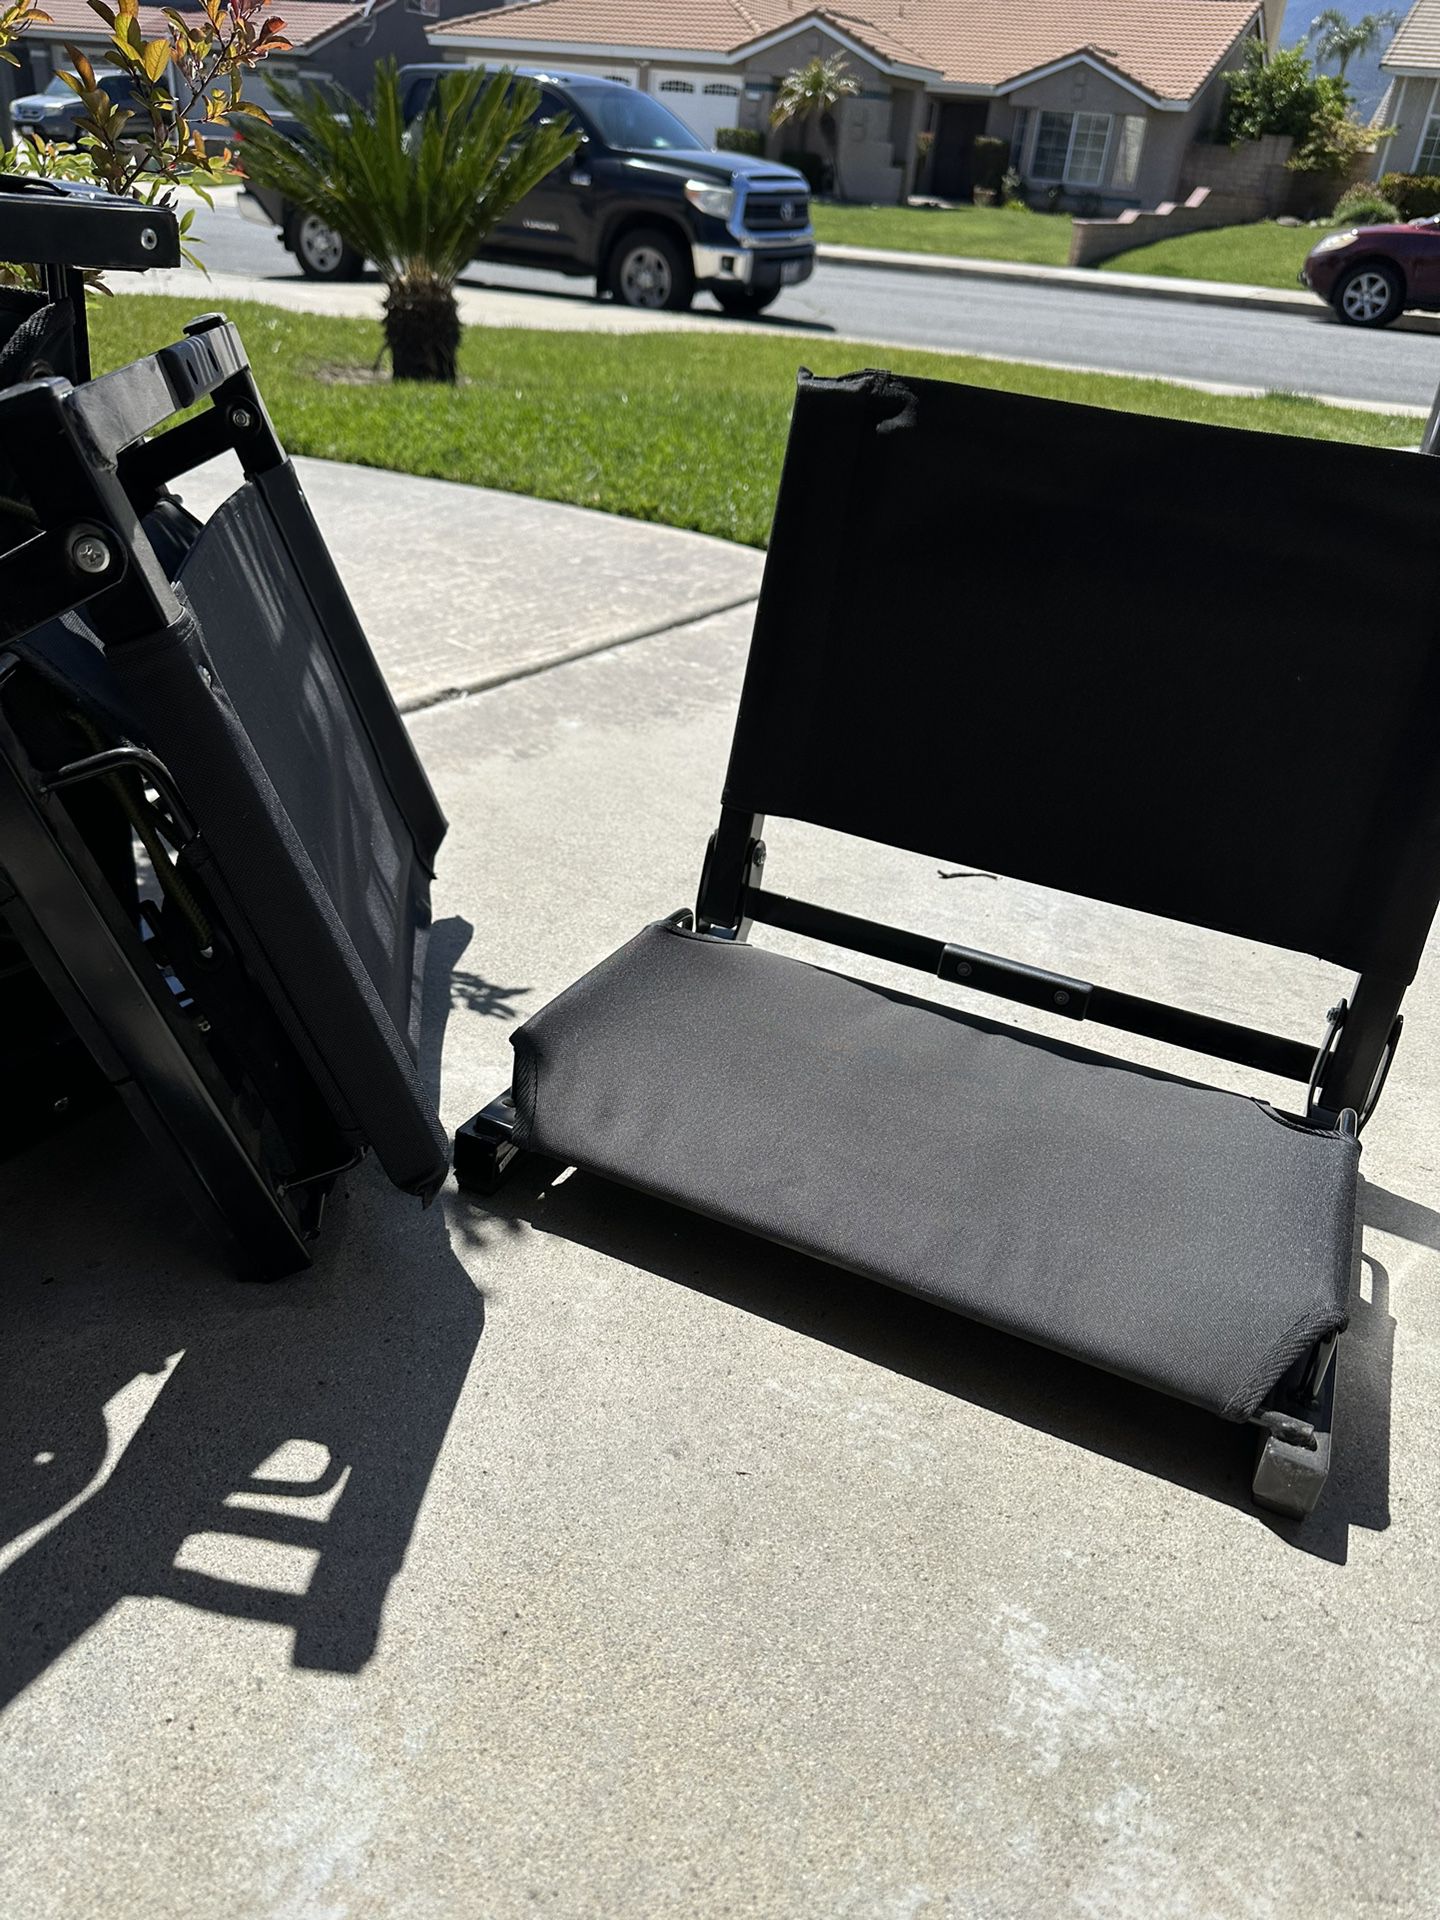 Stadium Chairs! Only Used Once! Just In Time For Graduations and Games! Foldable! Portable!